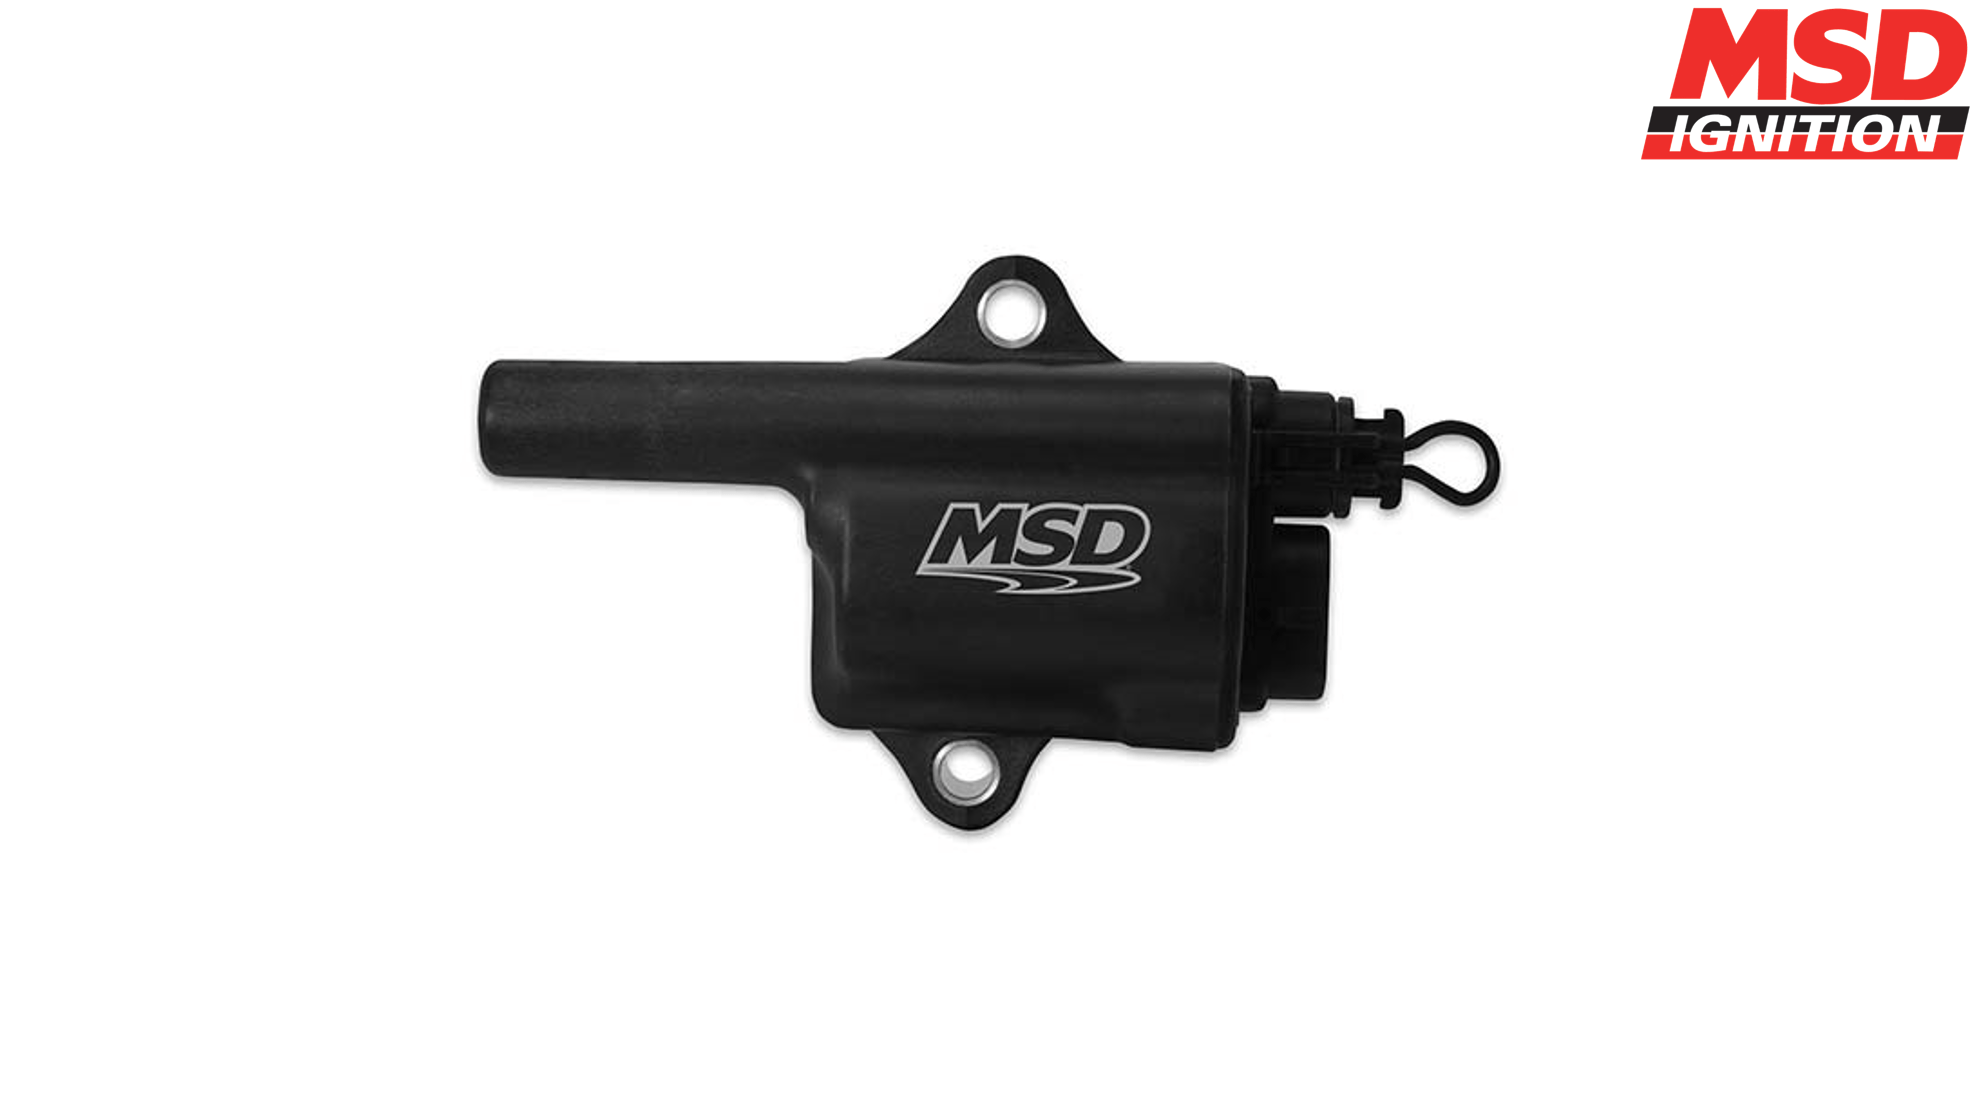 Looking For MSD Pro Power Coil Black Ignition Coil? Why Look Elsewhere When You Can Get Them At Partsavatar.ca